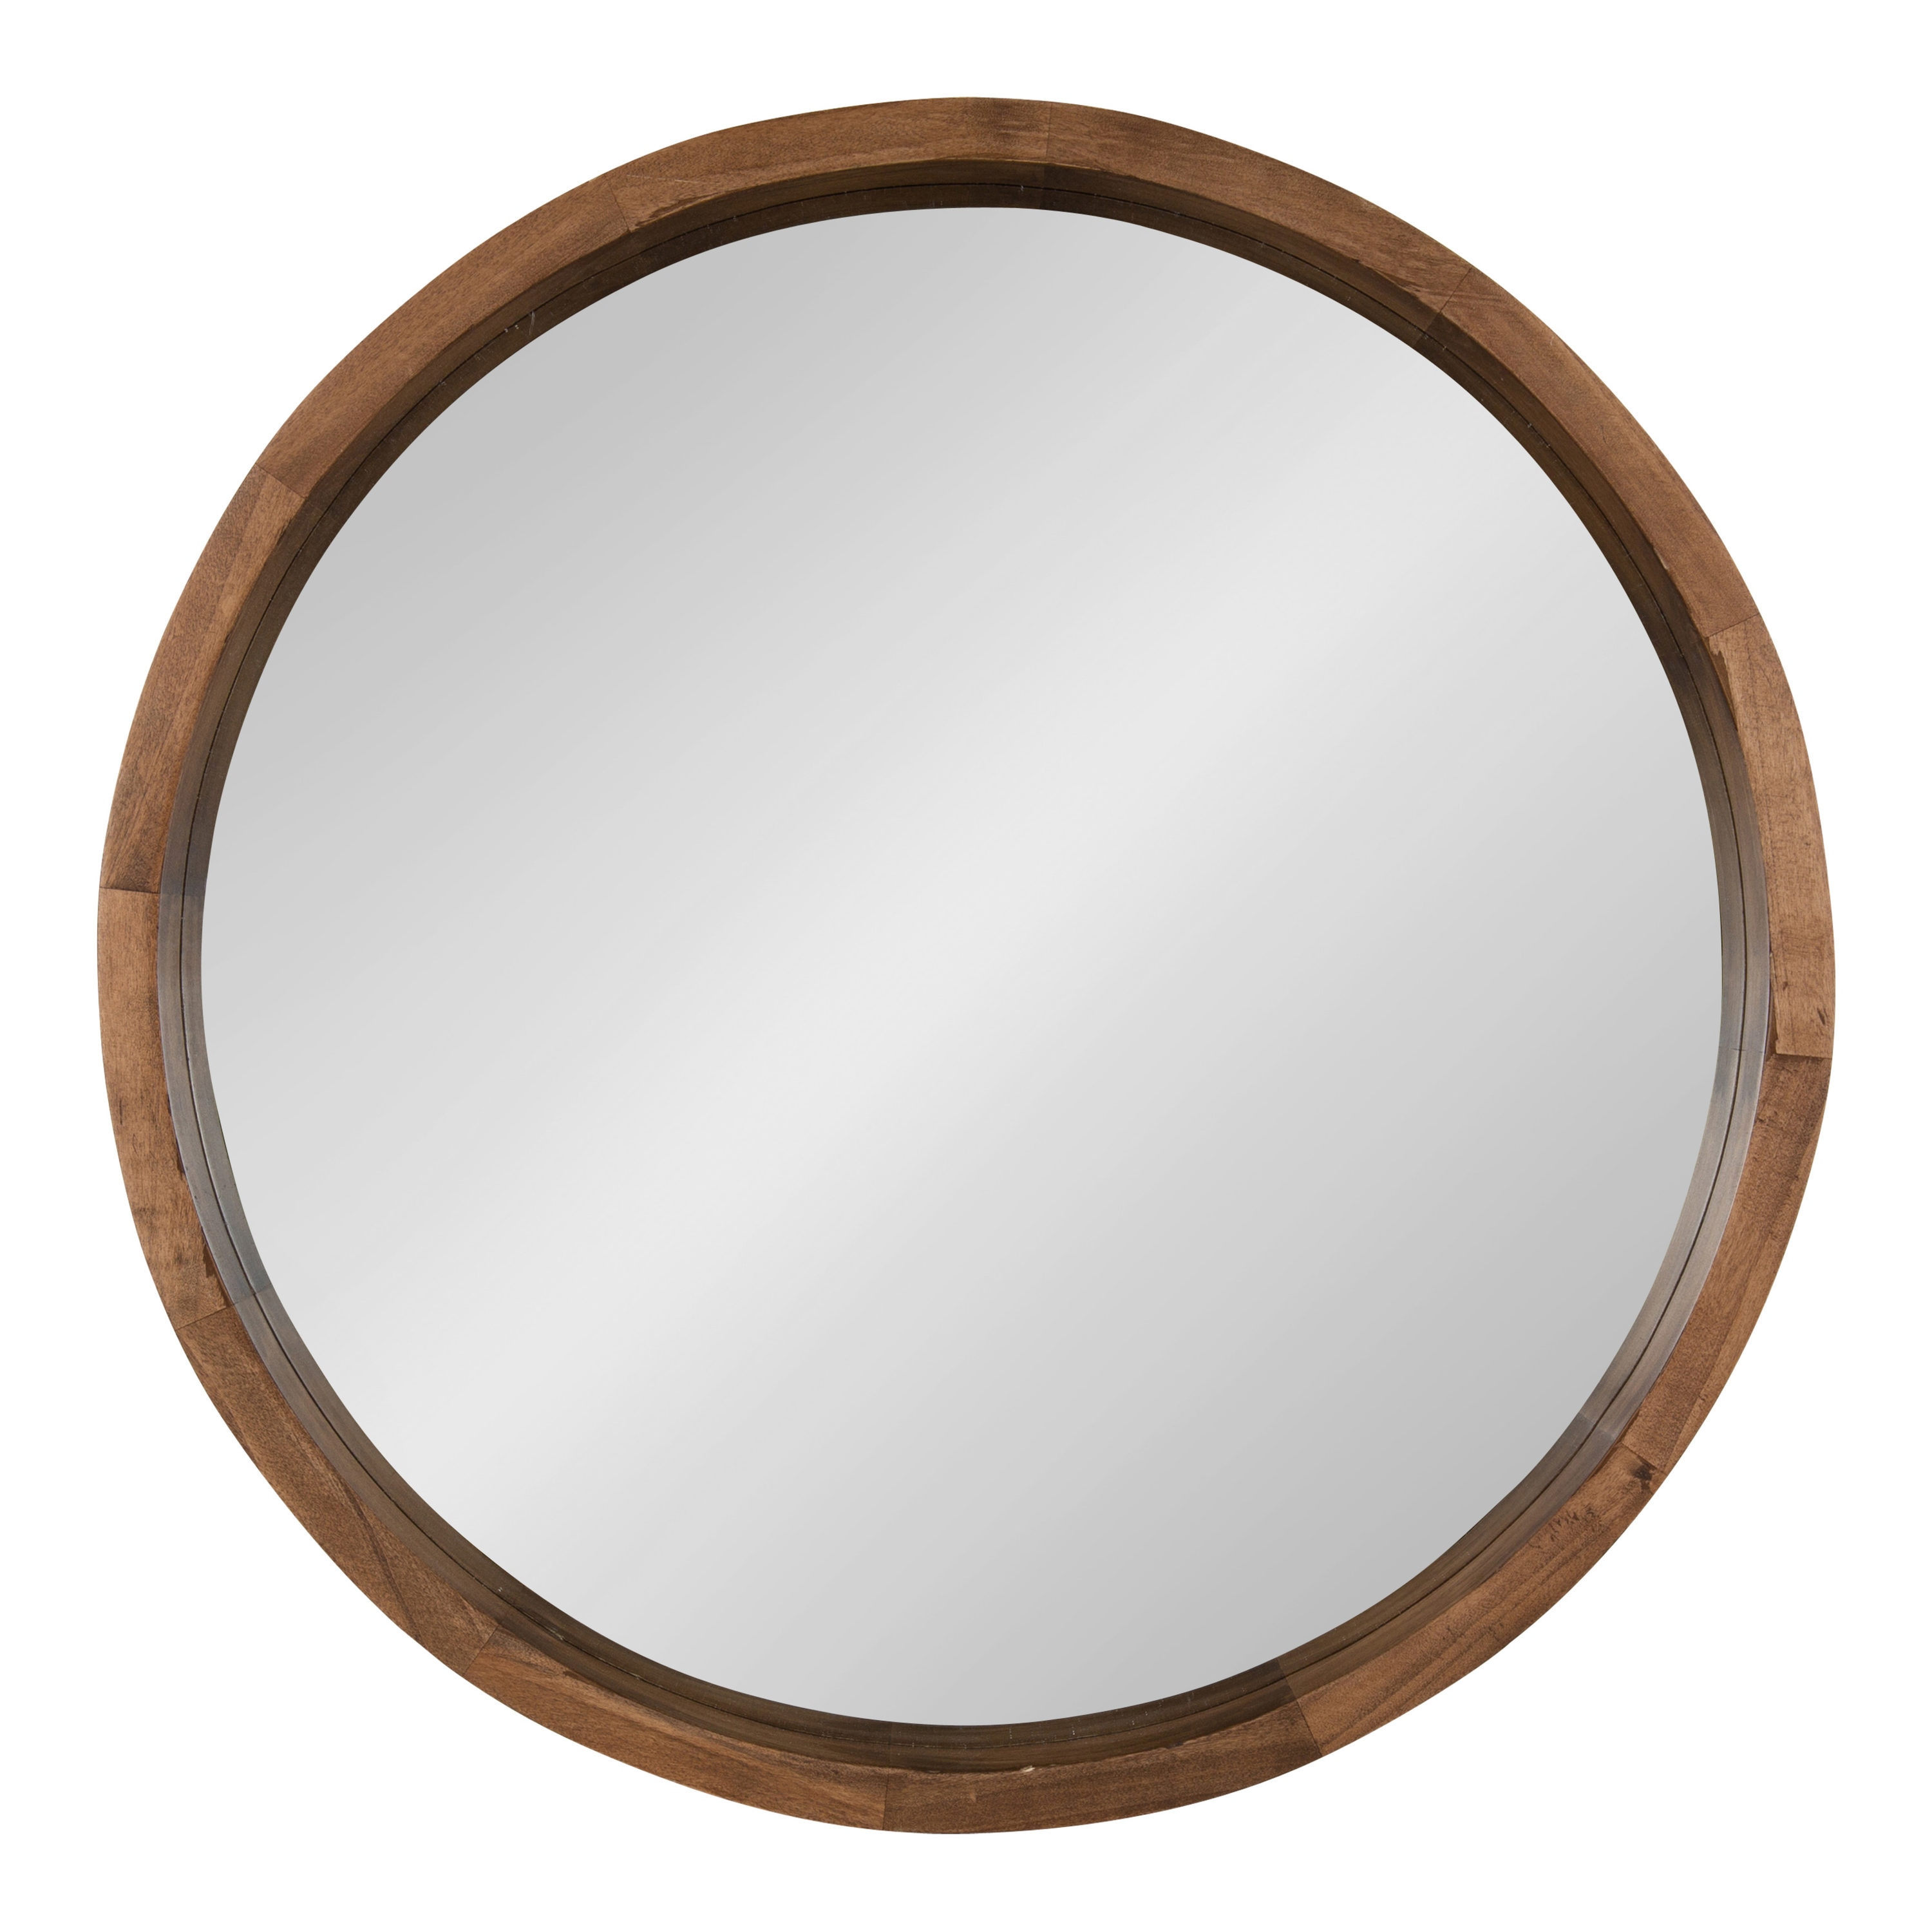 Round Wood Mirrors At Com, Round Wood Framed Bathroom Mirrors